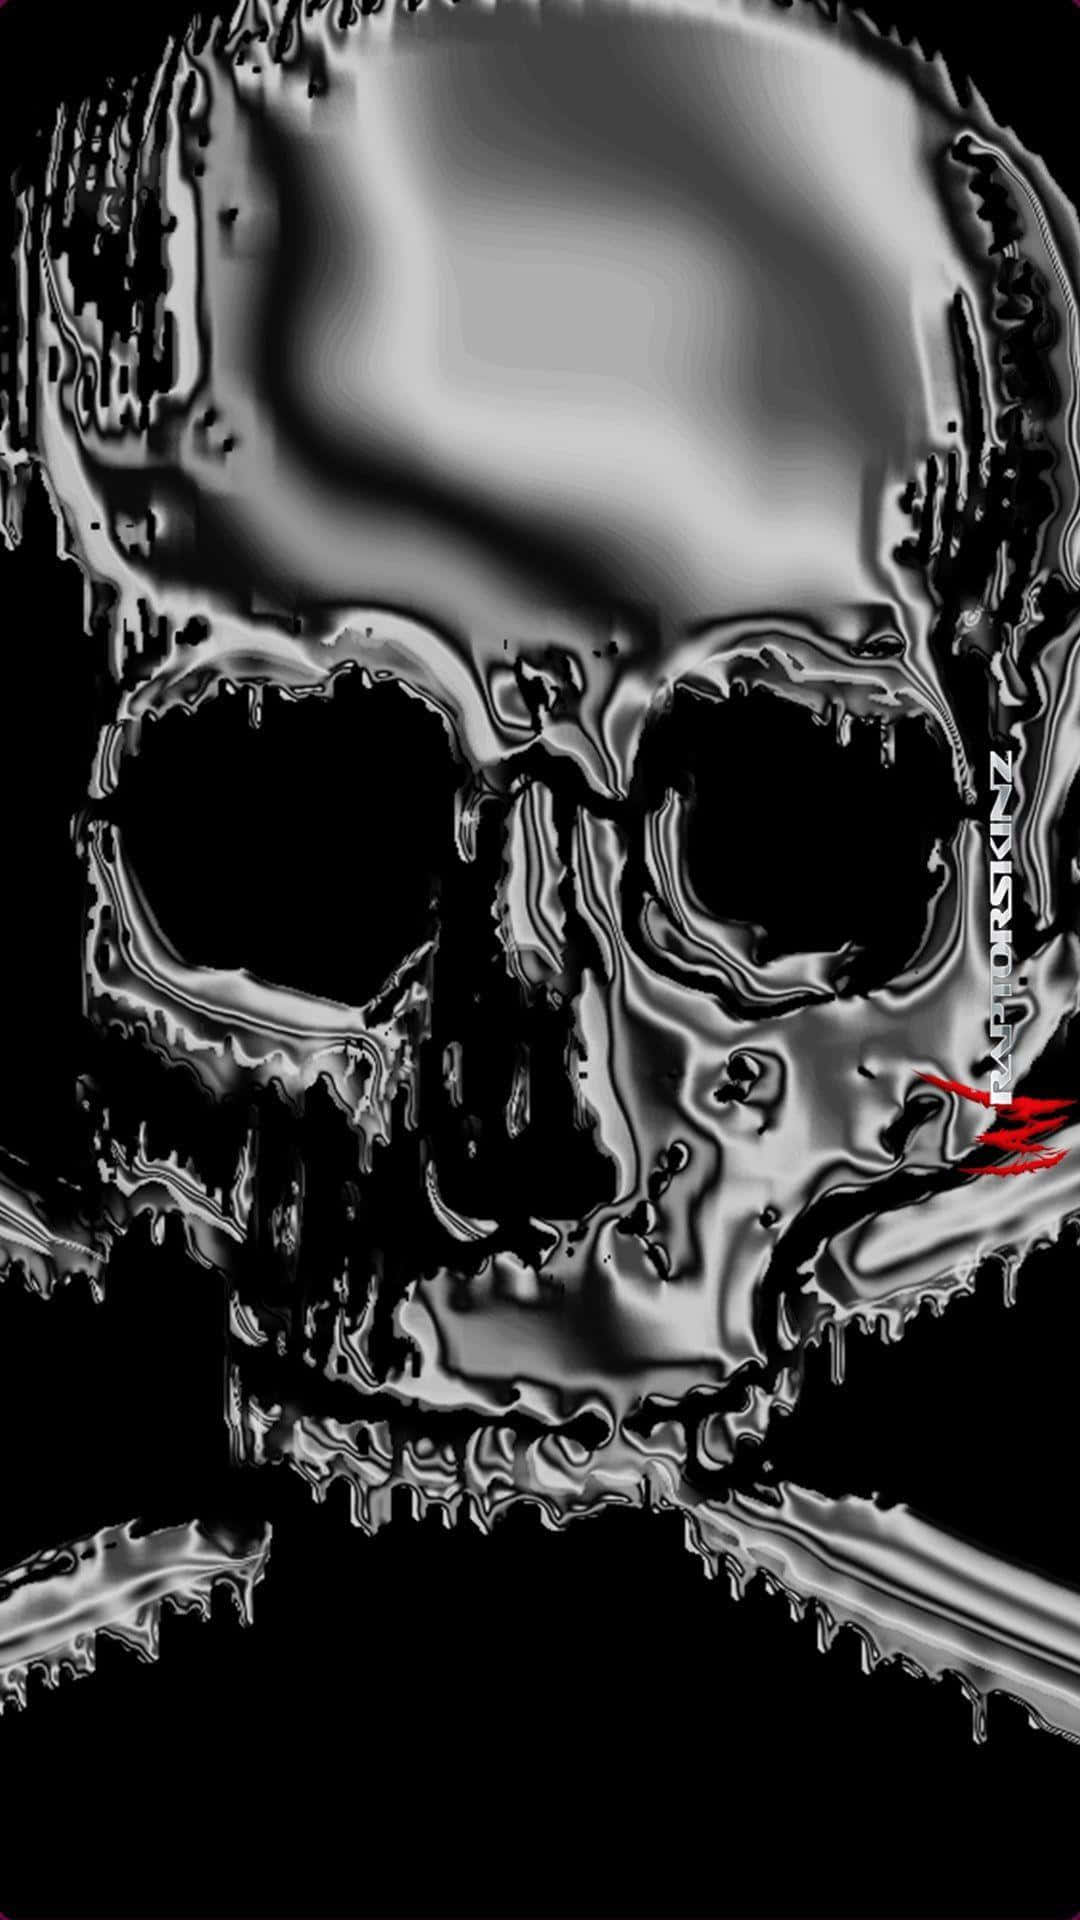 The Classic Symbol Of Death And Danger - A Skull And Crossbones. Background